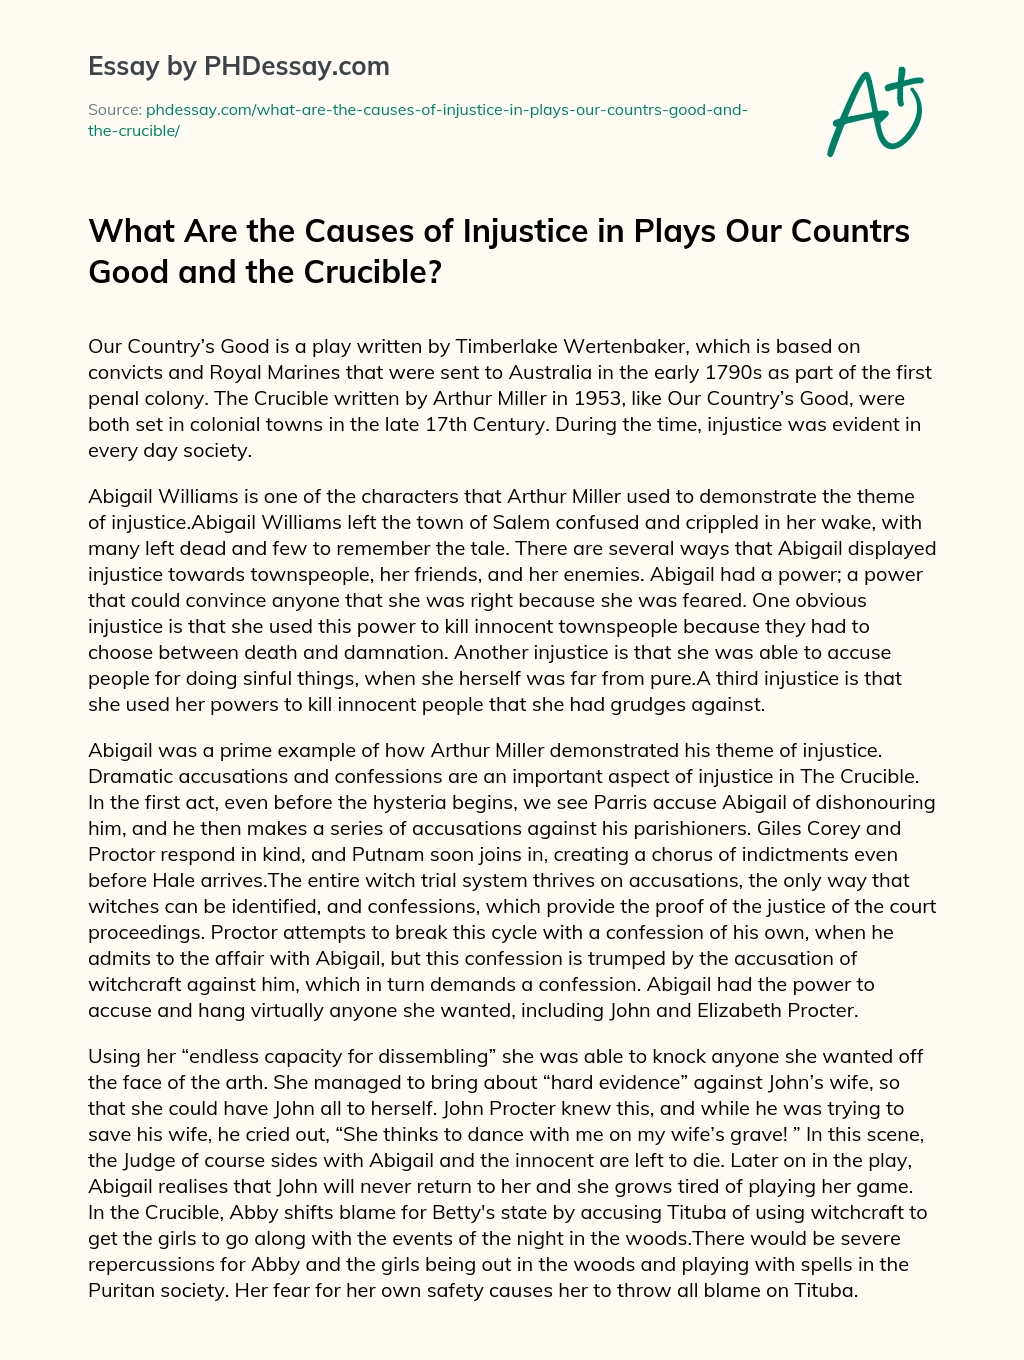 What Are the Causes of Injustice in Plays Our Countrs Good and the Crucible? essay